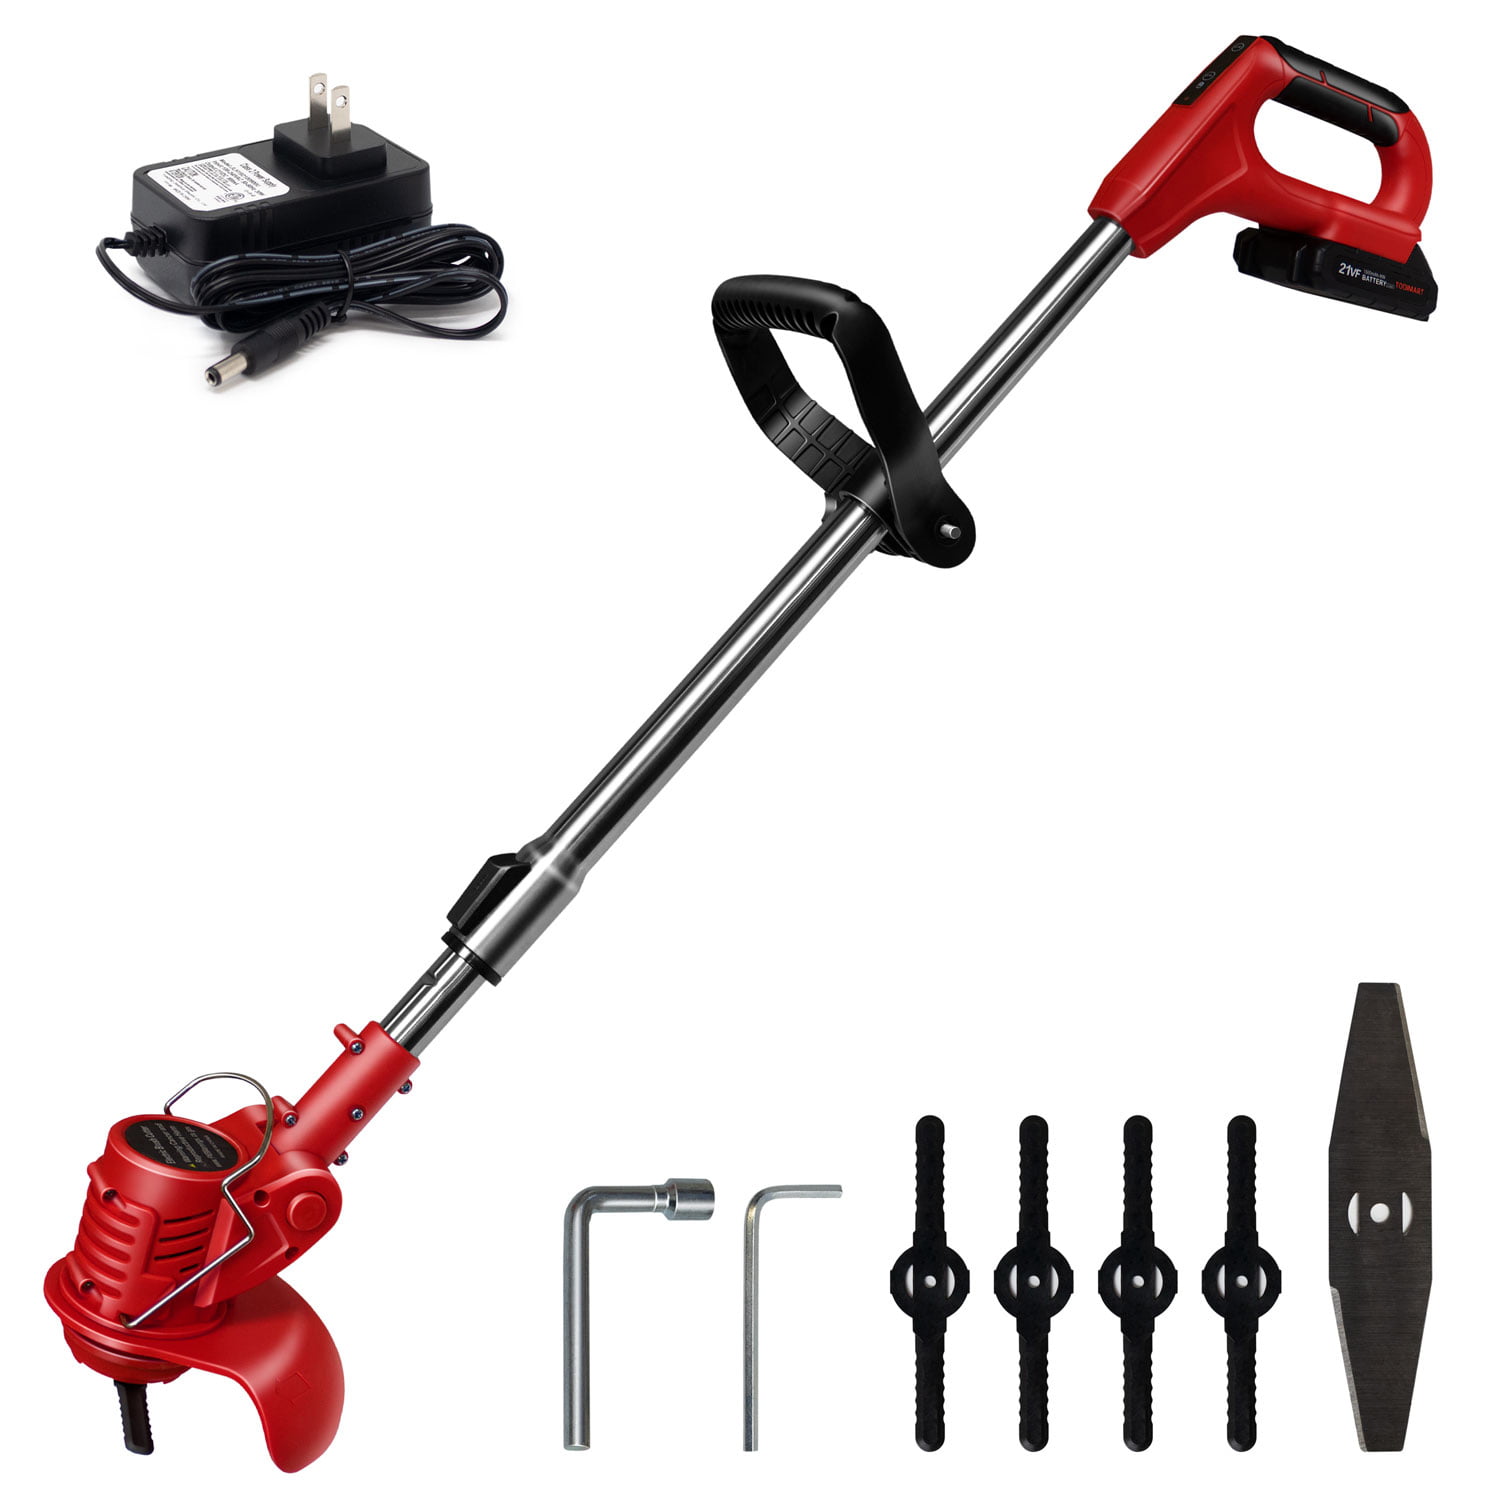 Telescopic Rod and Adjustable Machine Head Includes 2 Batteries Suitable for Lawn Garden Pruning MAXMAN 47 in Cordless String Trimmer,21V Lithium Battery Garden Grass Trimmer 